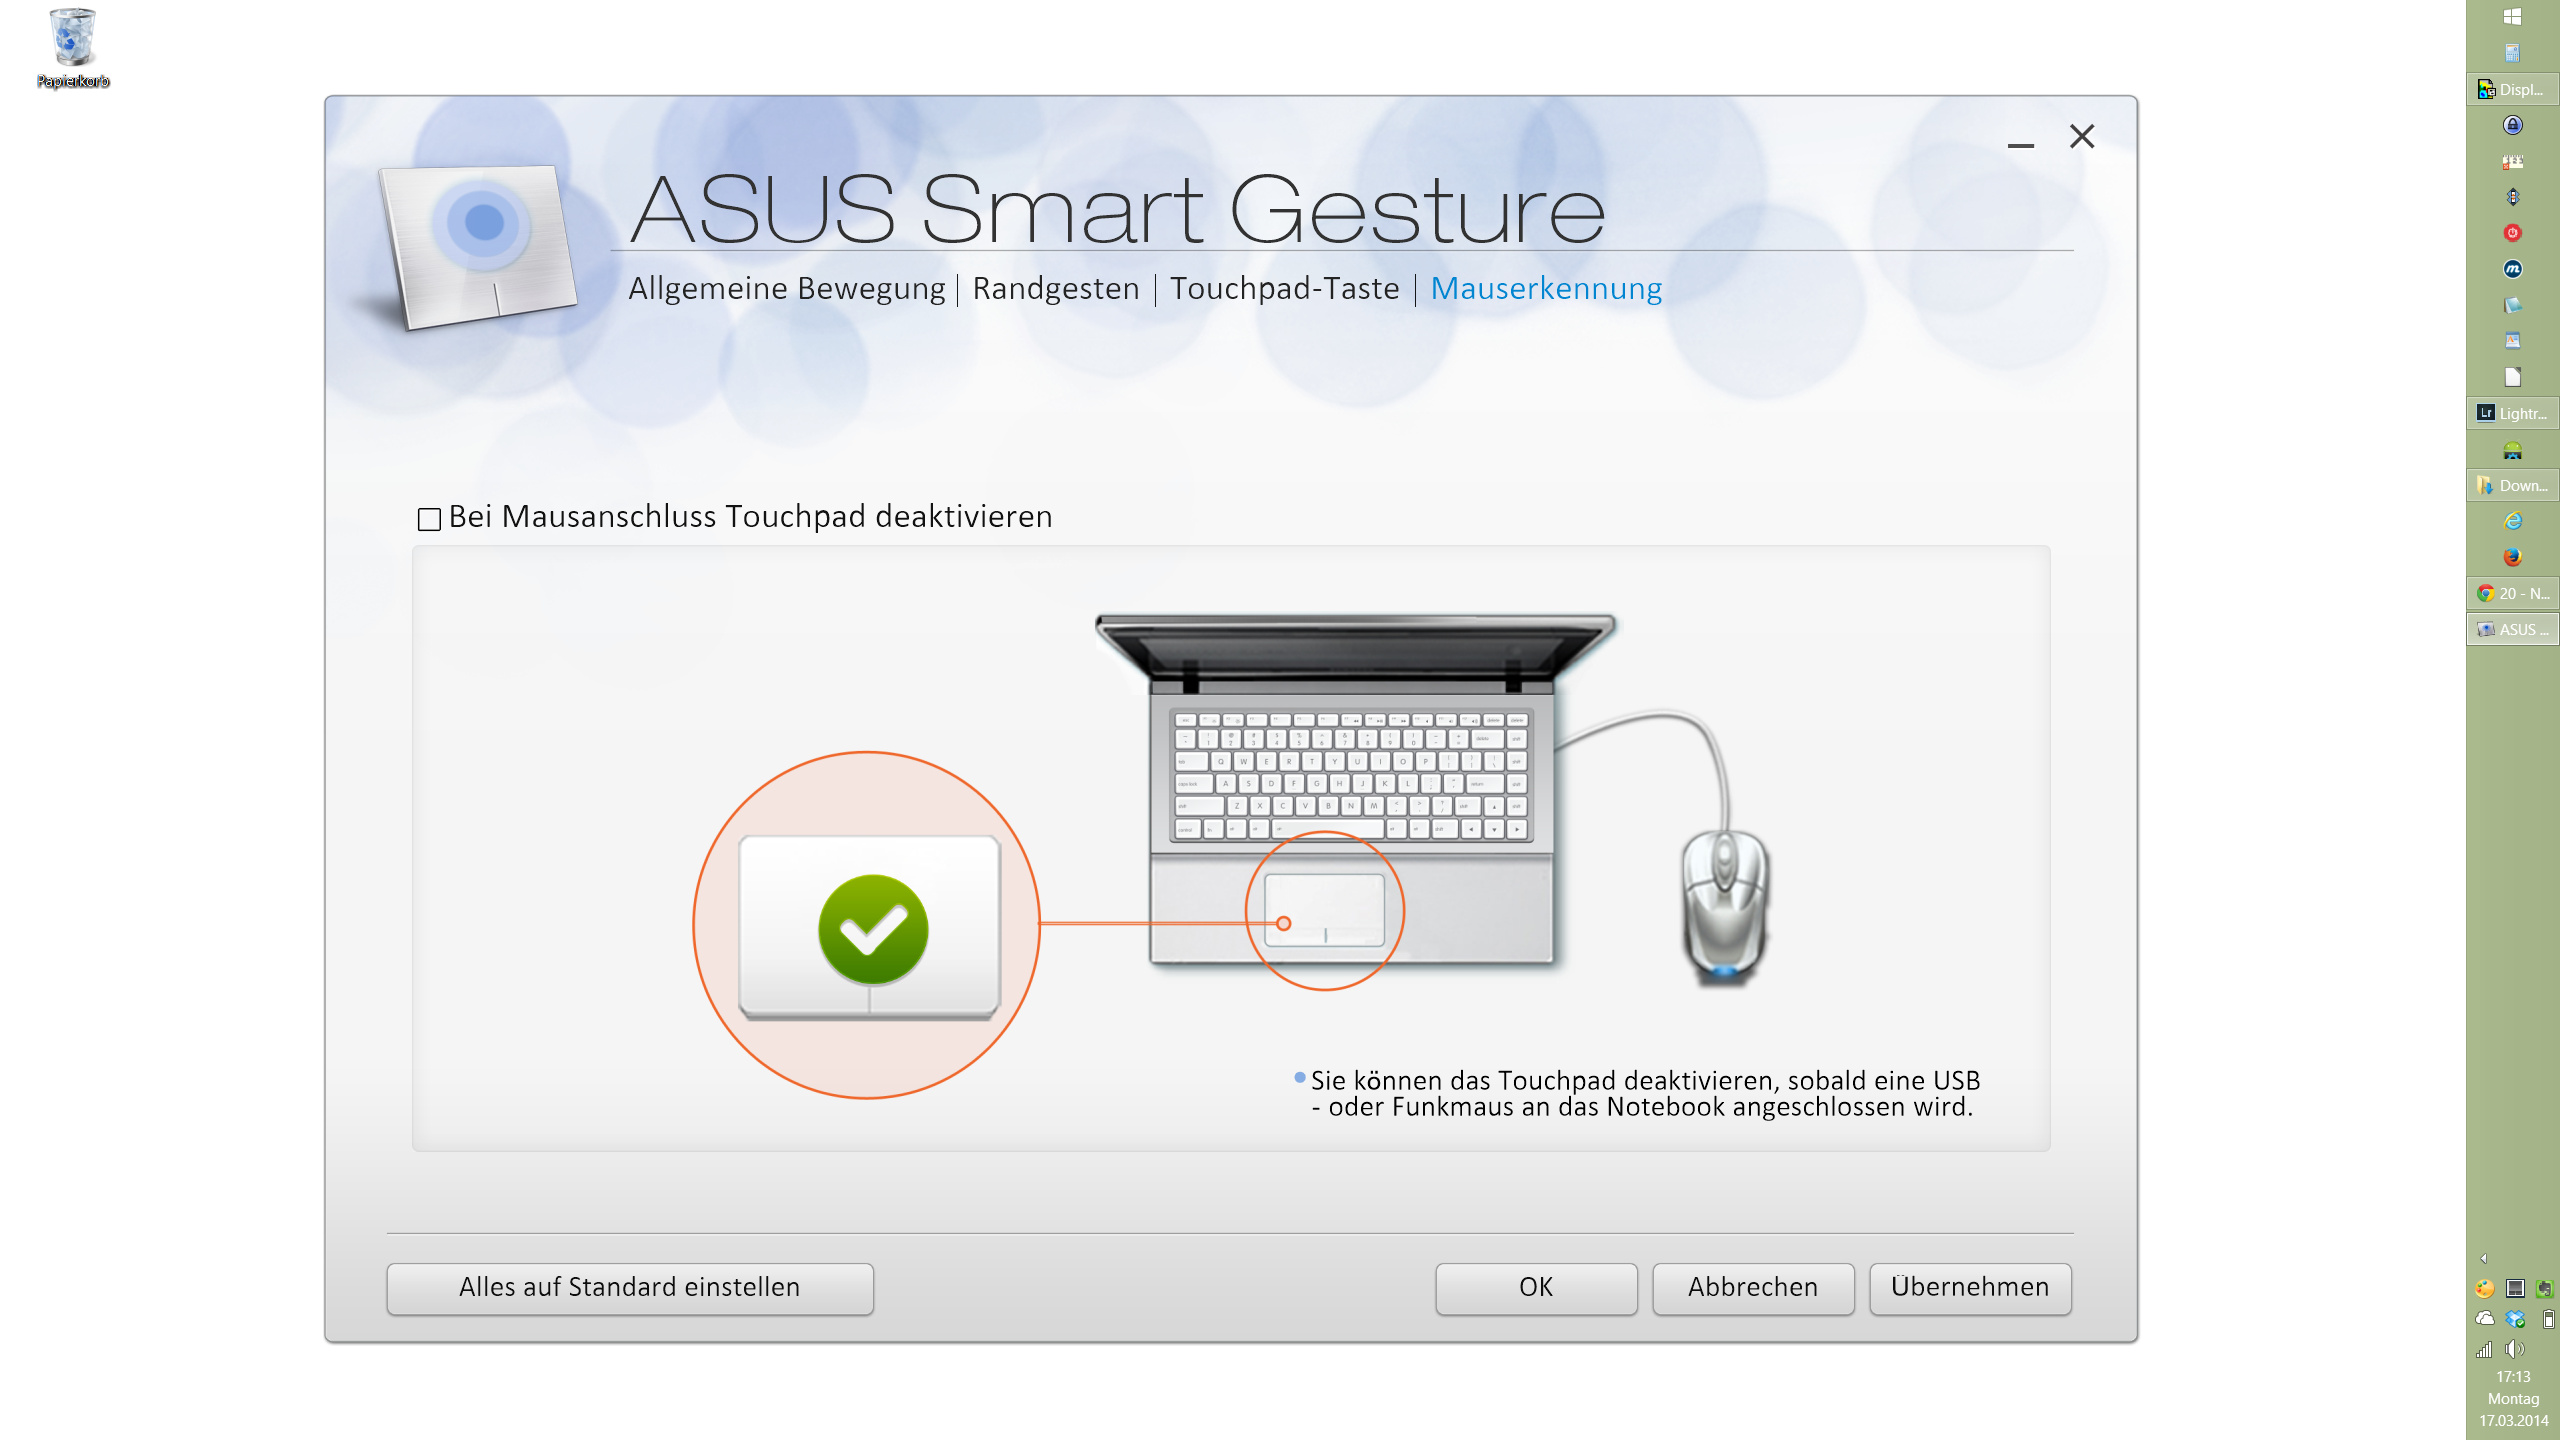 asus driver download for elan touchpad